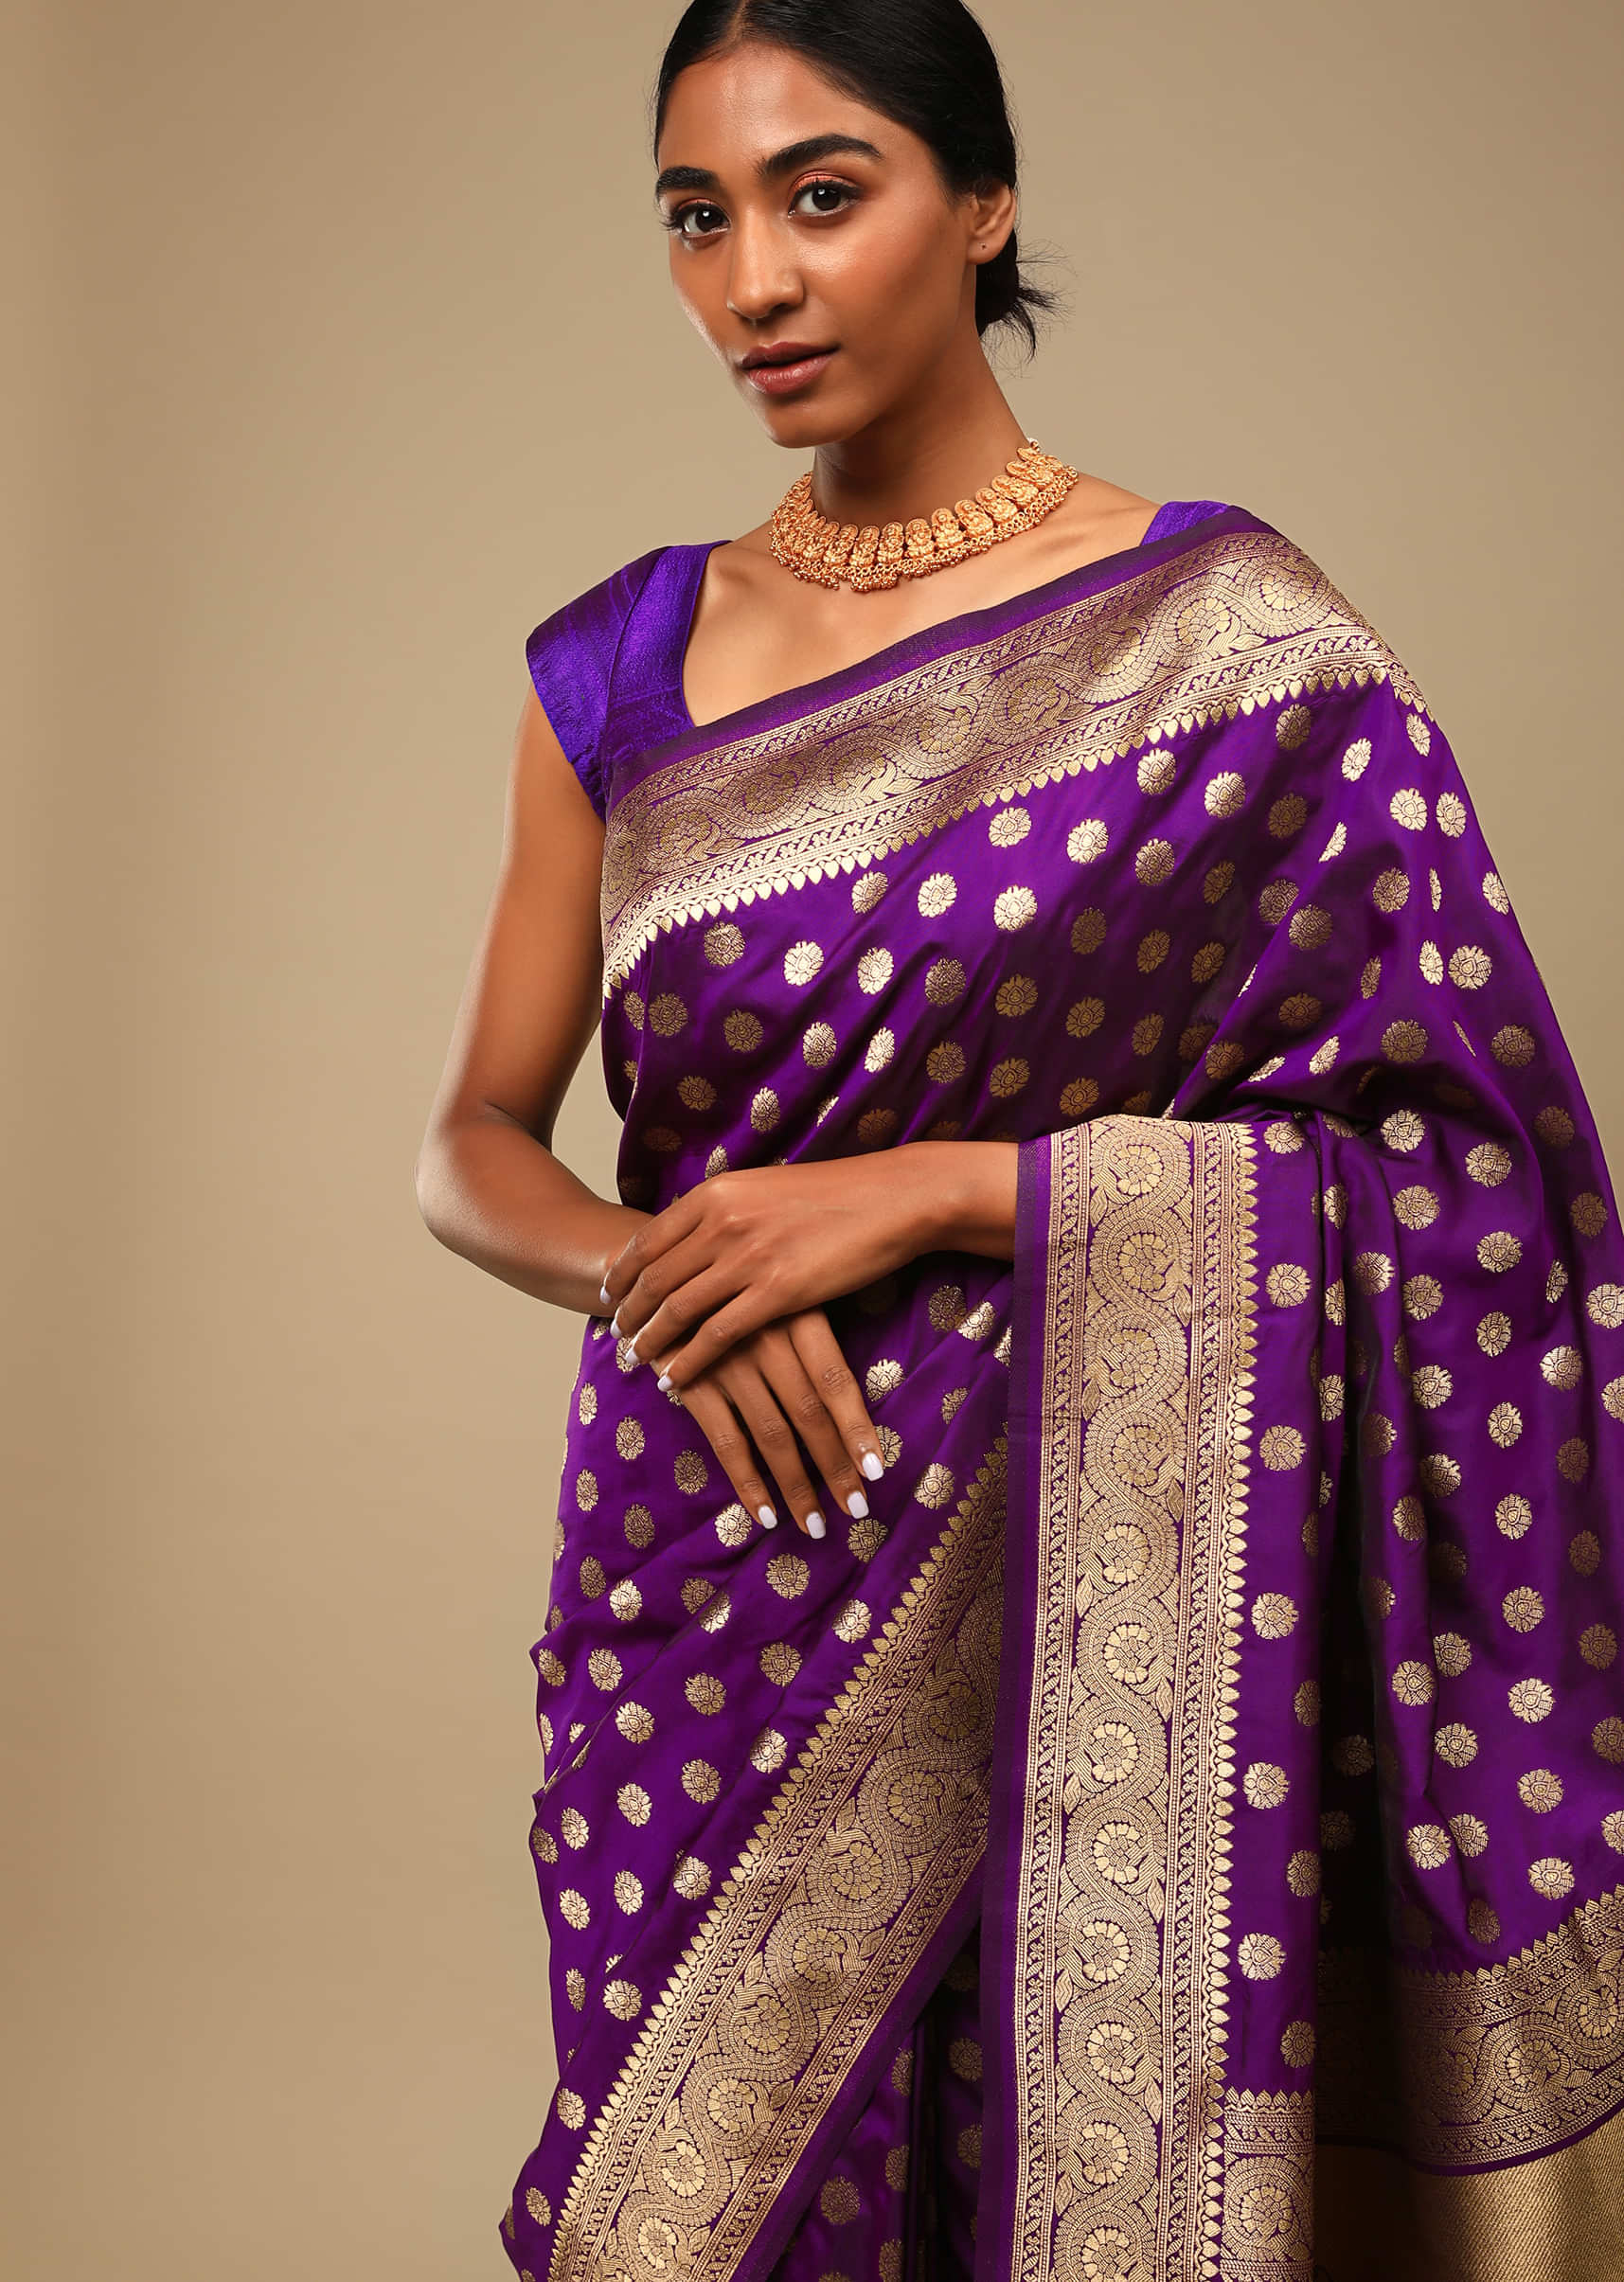 Grape Purple Saree In Art Handloom Silk With Woven Floral Buttis, Paisley Motifs On The Pallu And Unstitched Blouse  